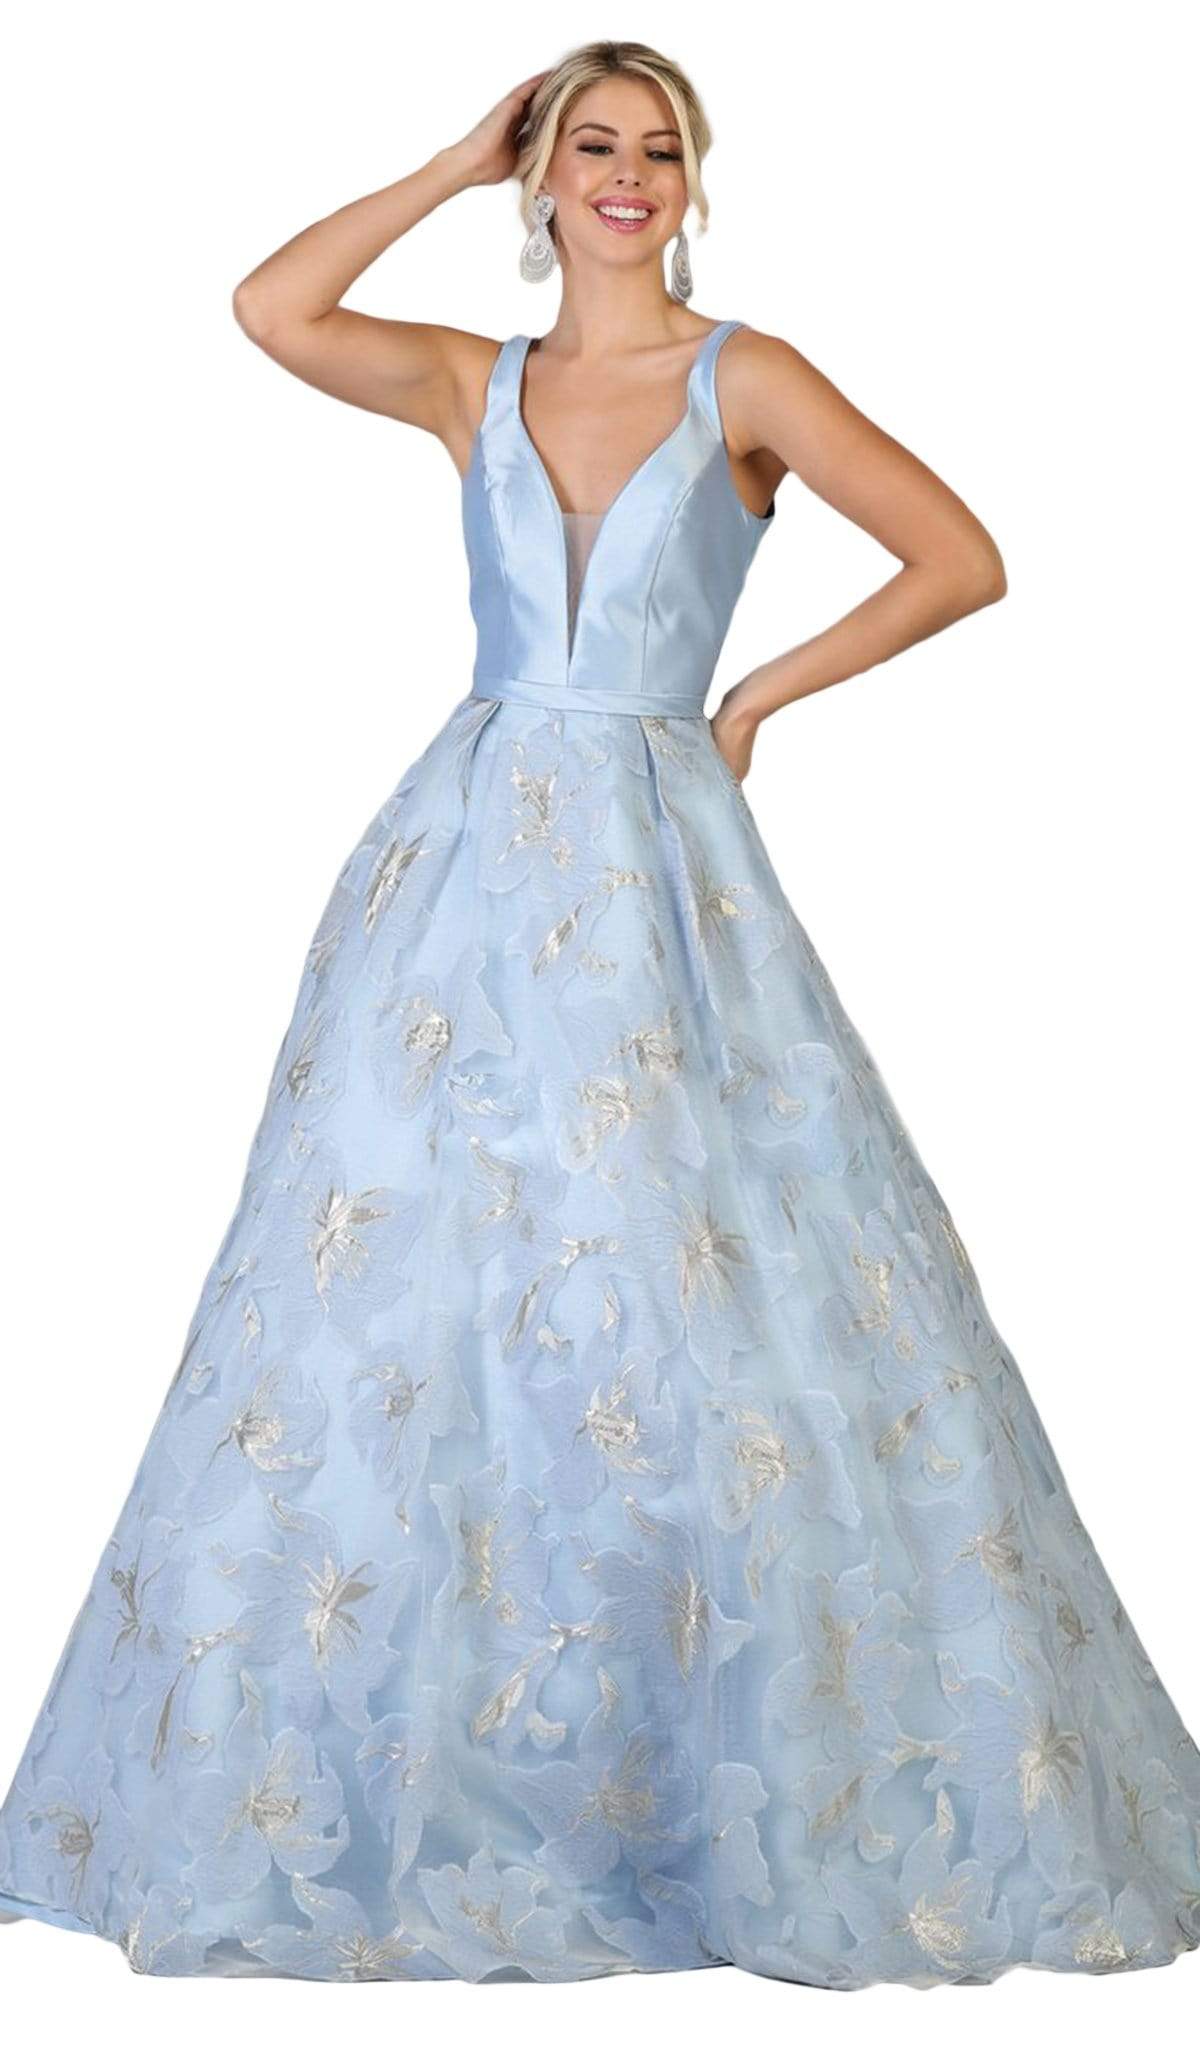 May Queen - RQ7730 Plunging V-Neck Floral Ballgown Special Occasion Dress 4 / Baby-Blue